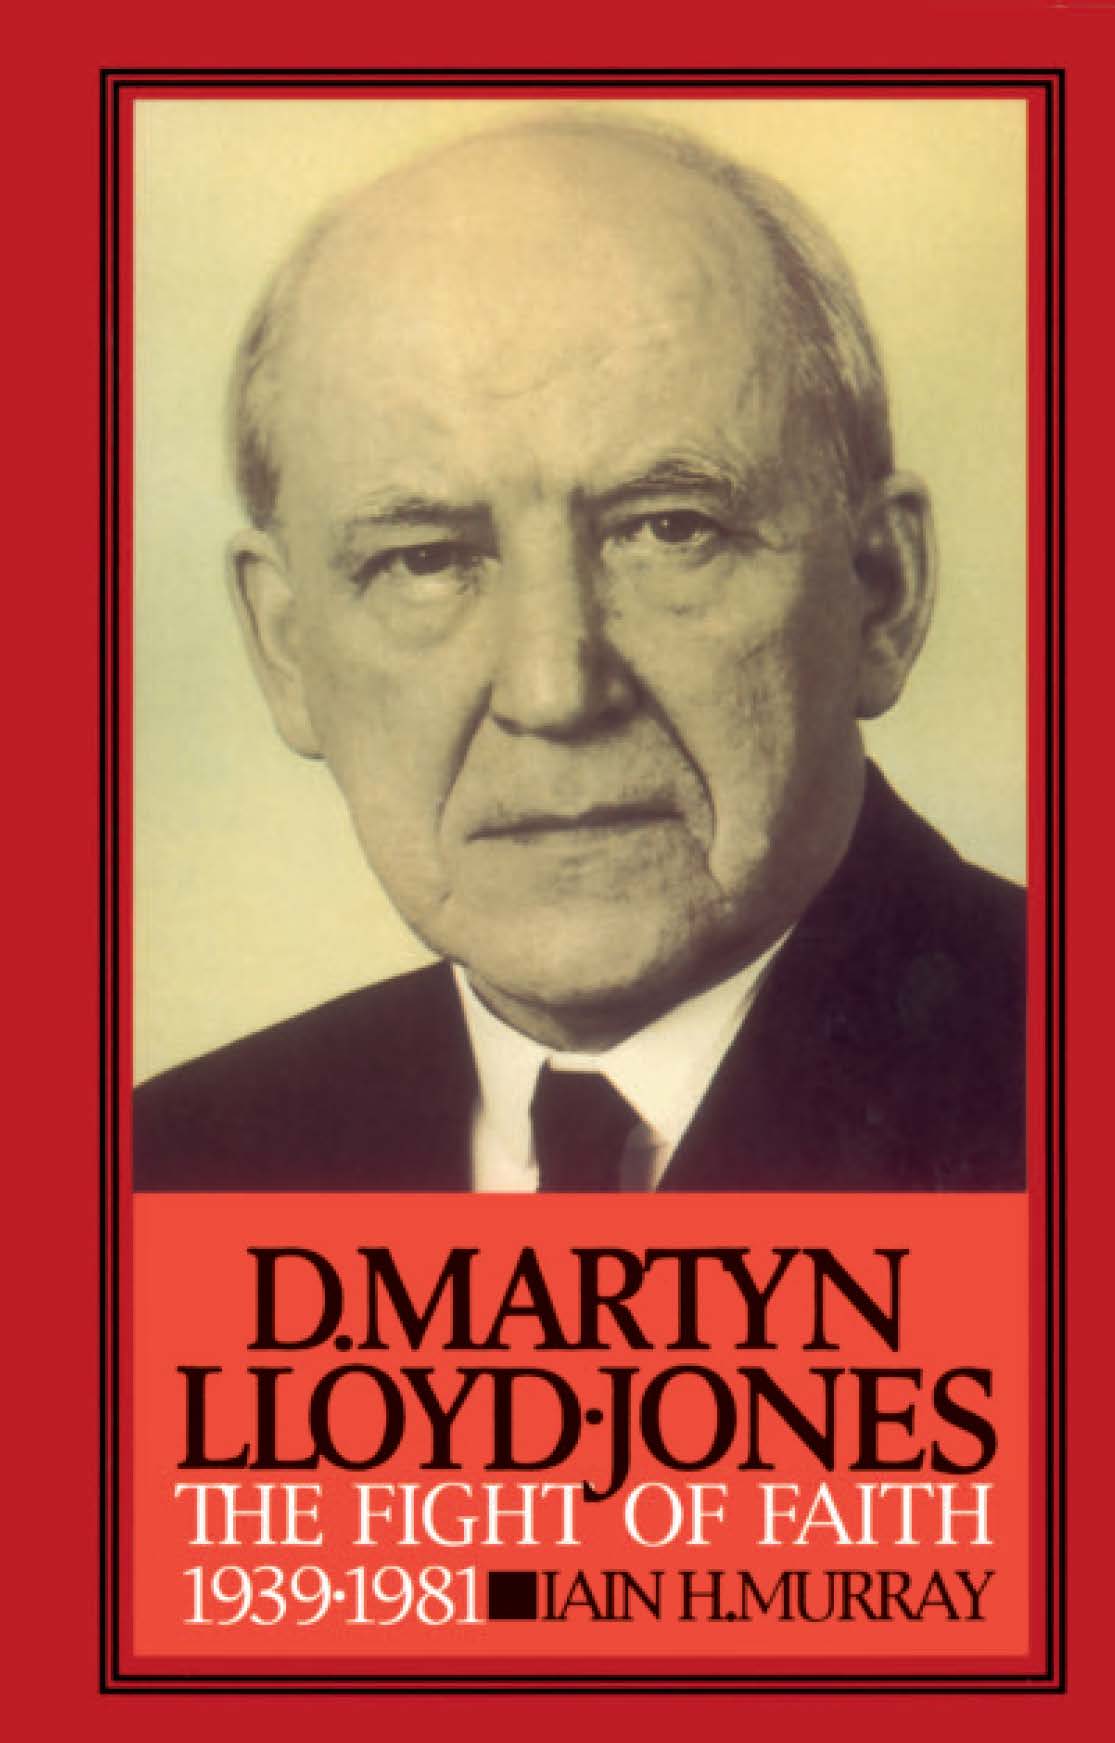 Book Cover For 'Life Of D Martyn Lloyd-Jones'